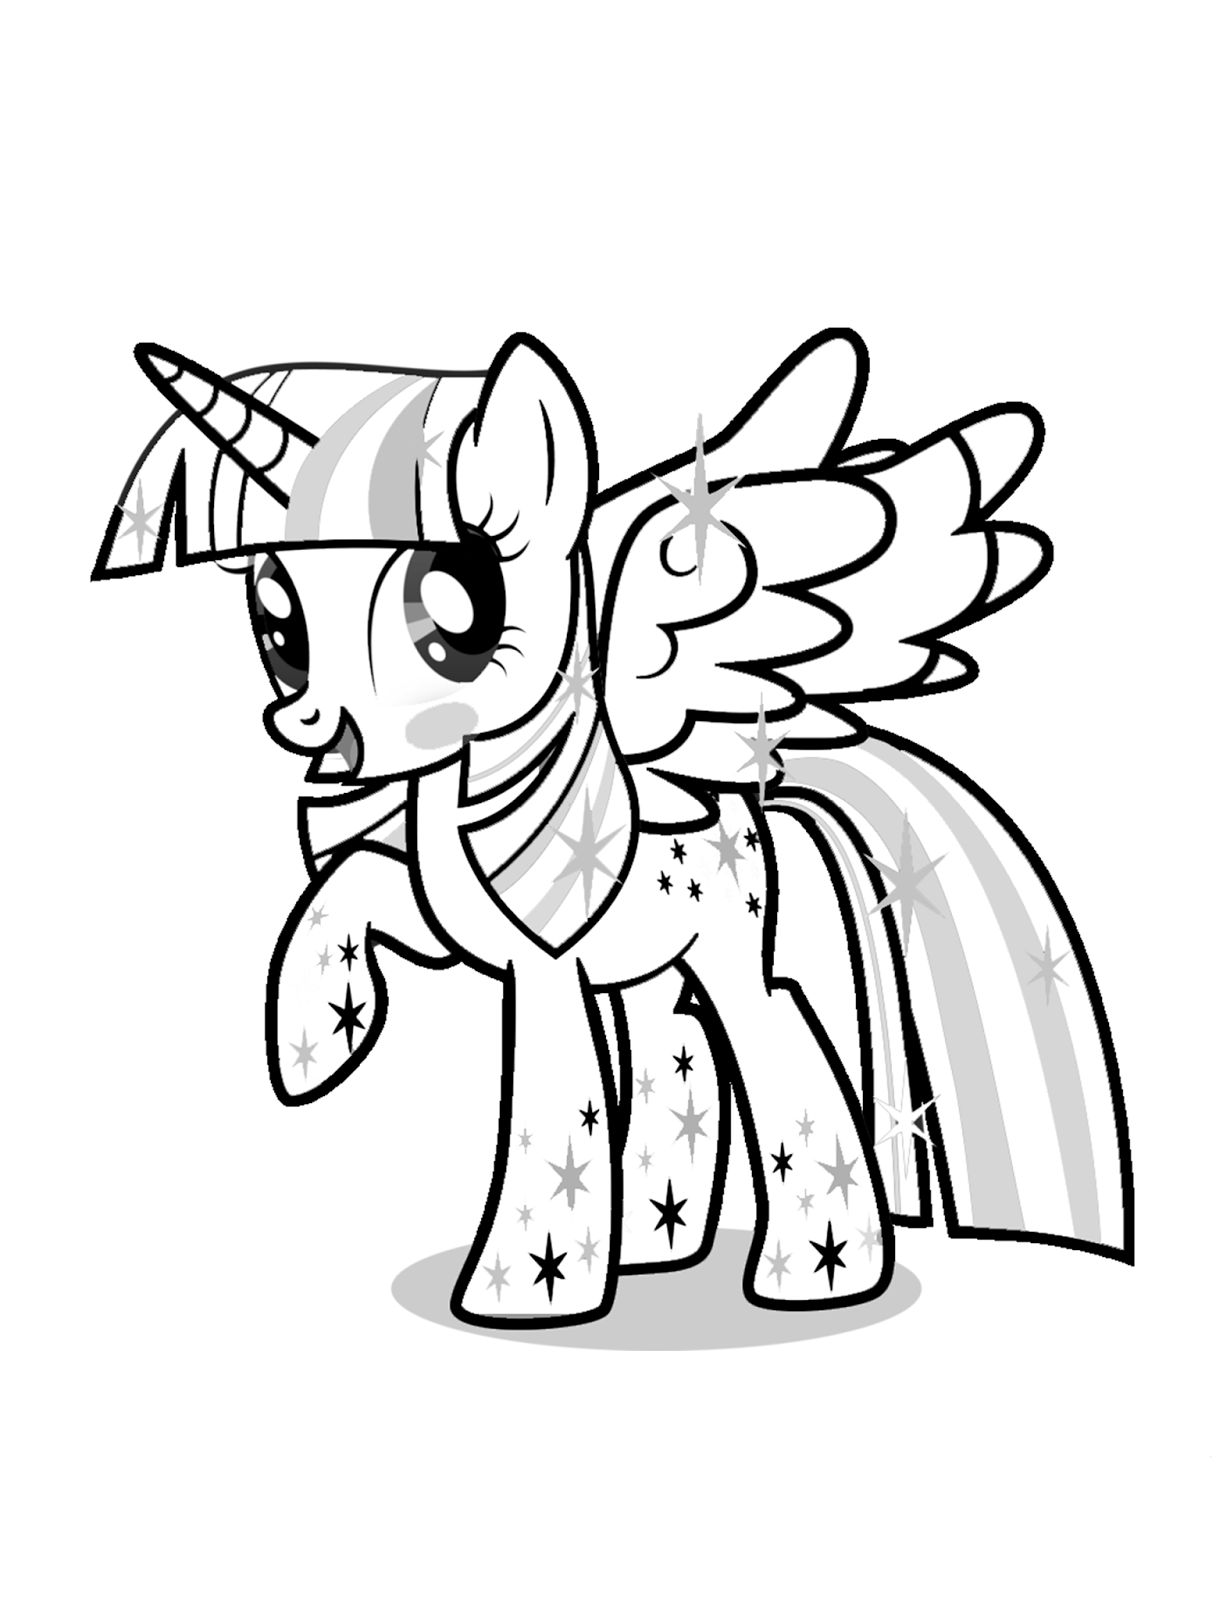 Simple My Little Pony Coloring Pages Princess Twilight Sparkle Alicorn for Kids